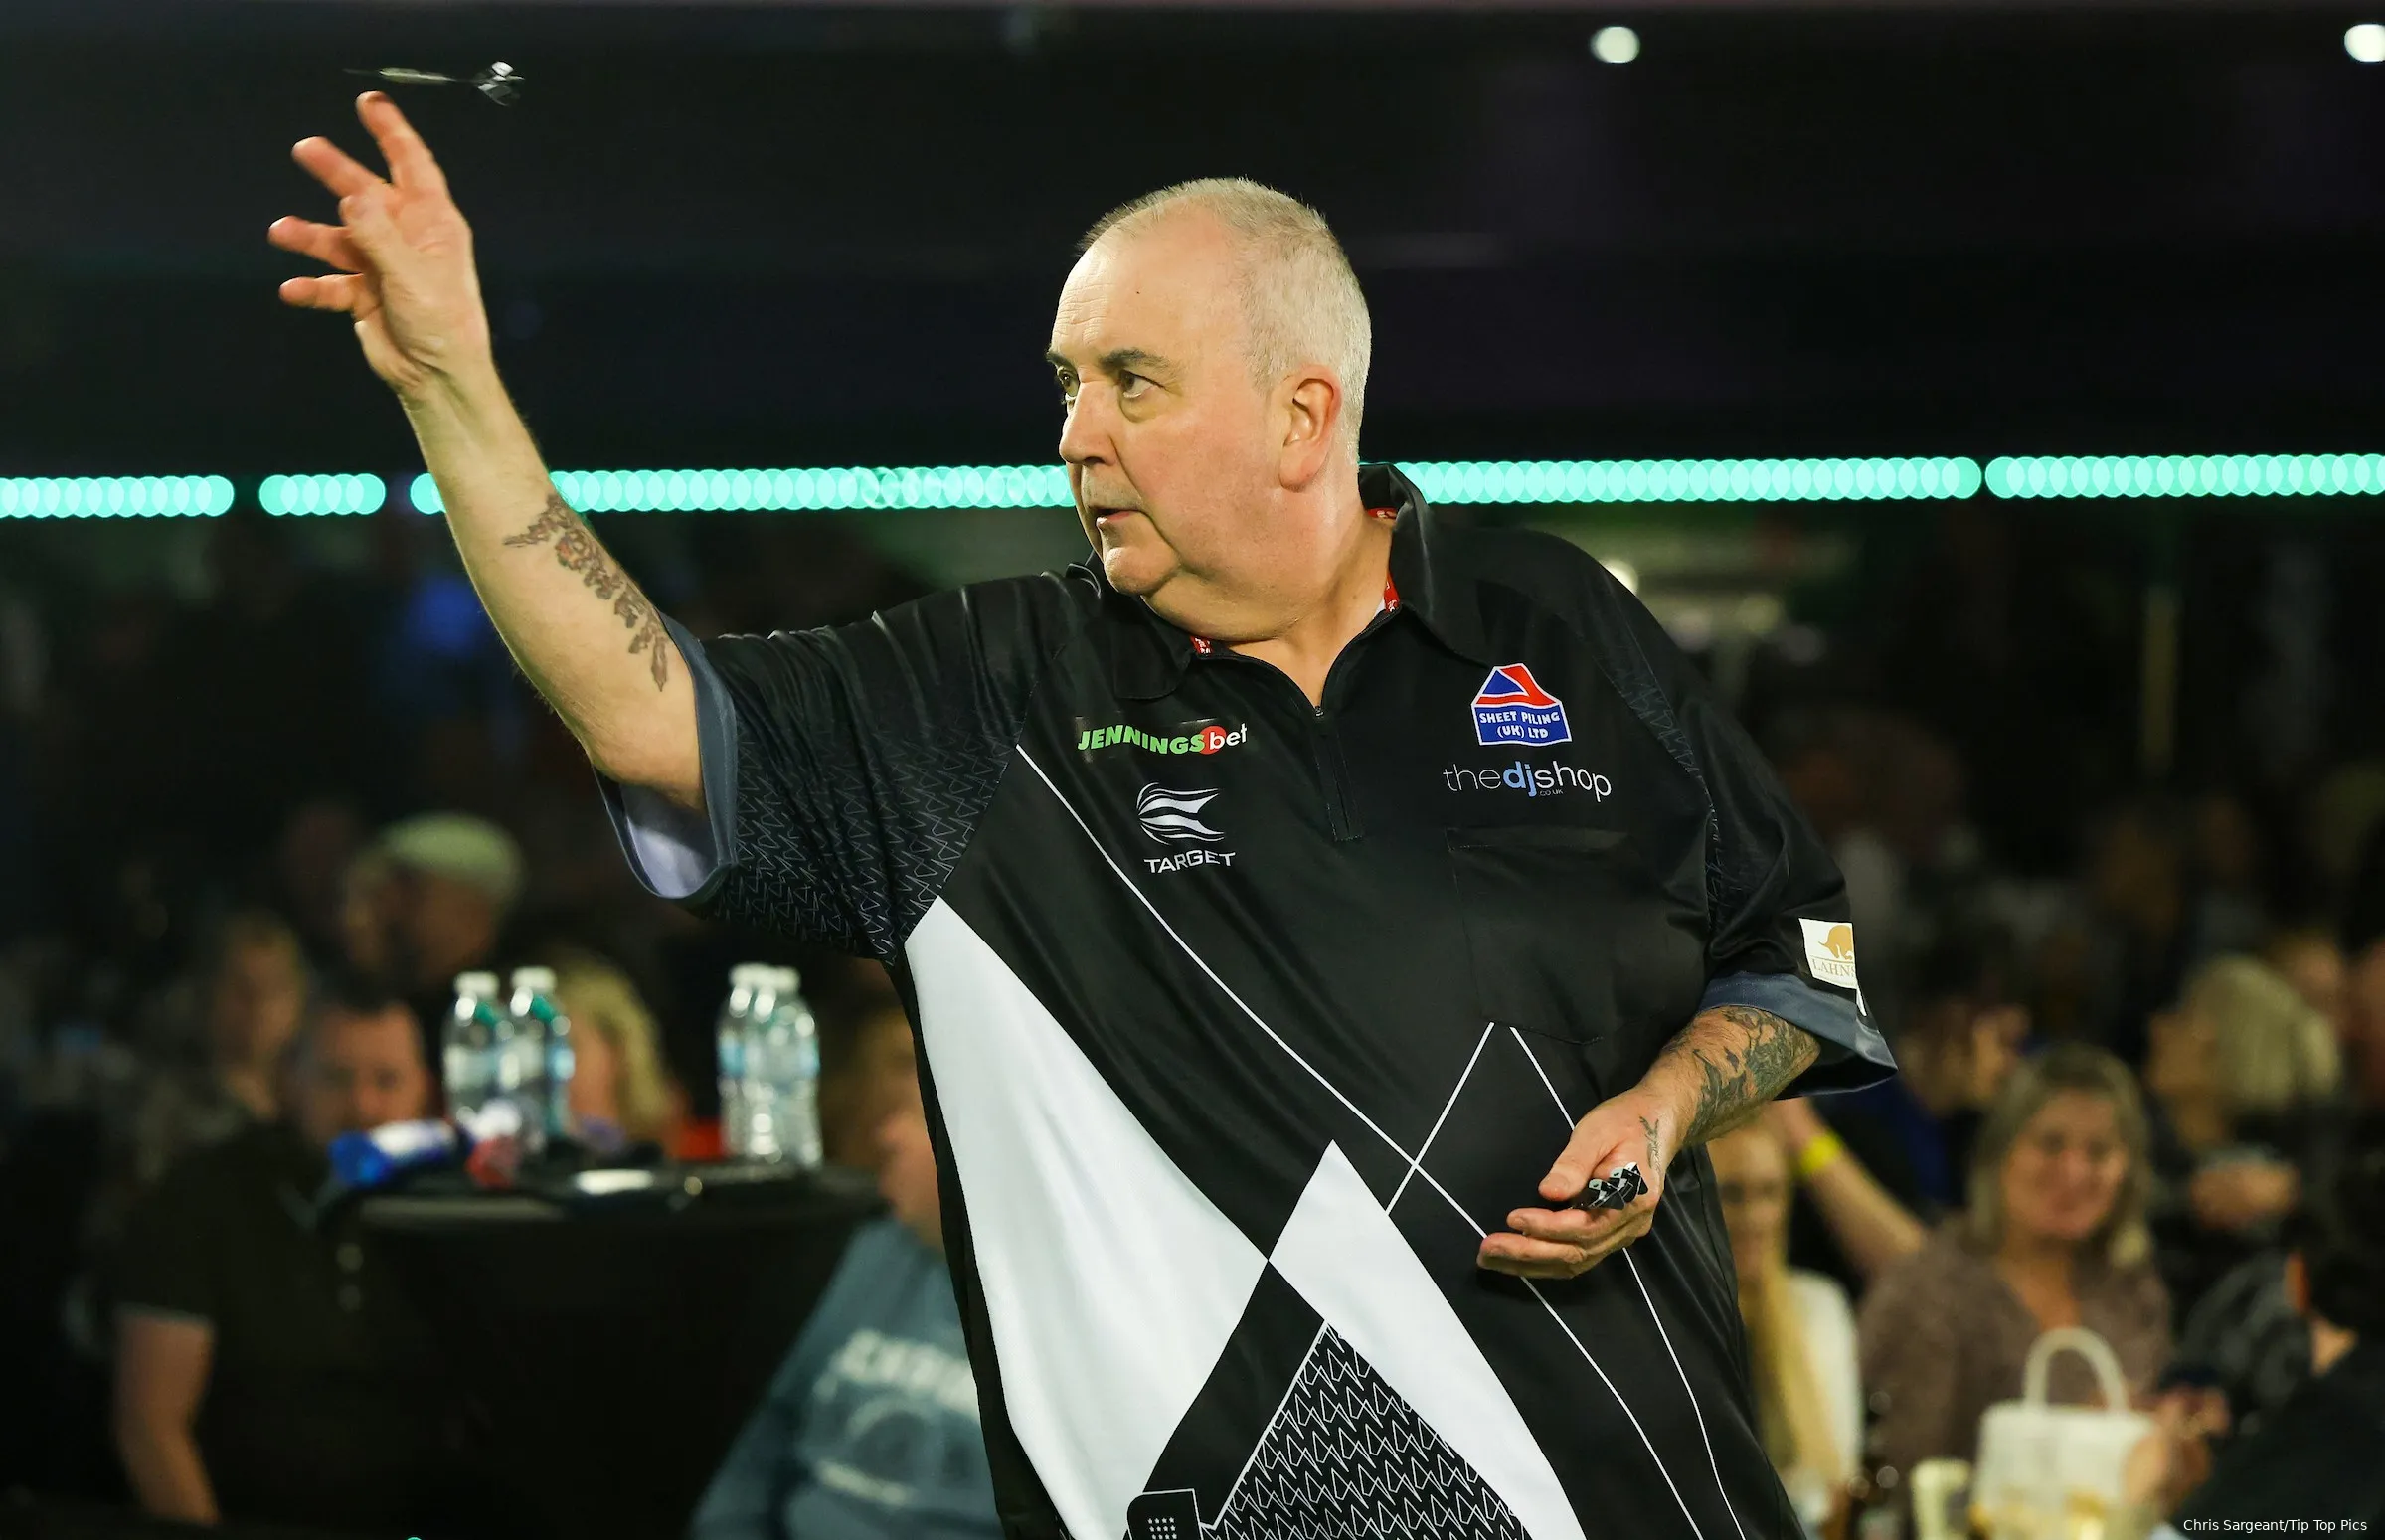 phil taylor champion of champions wsdt 641f2aebbe69d